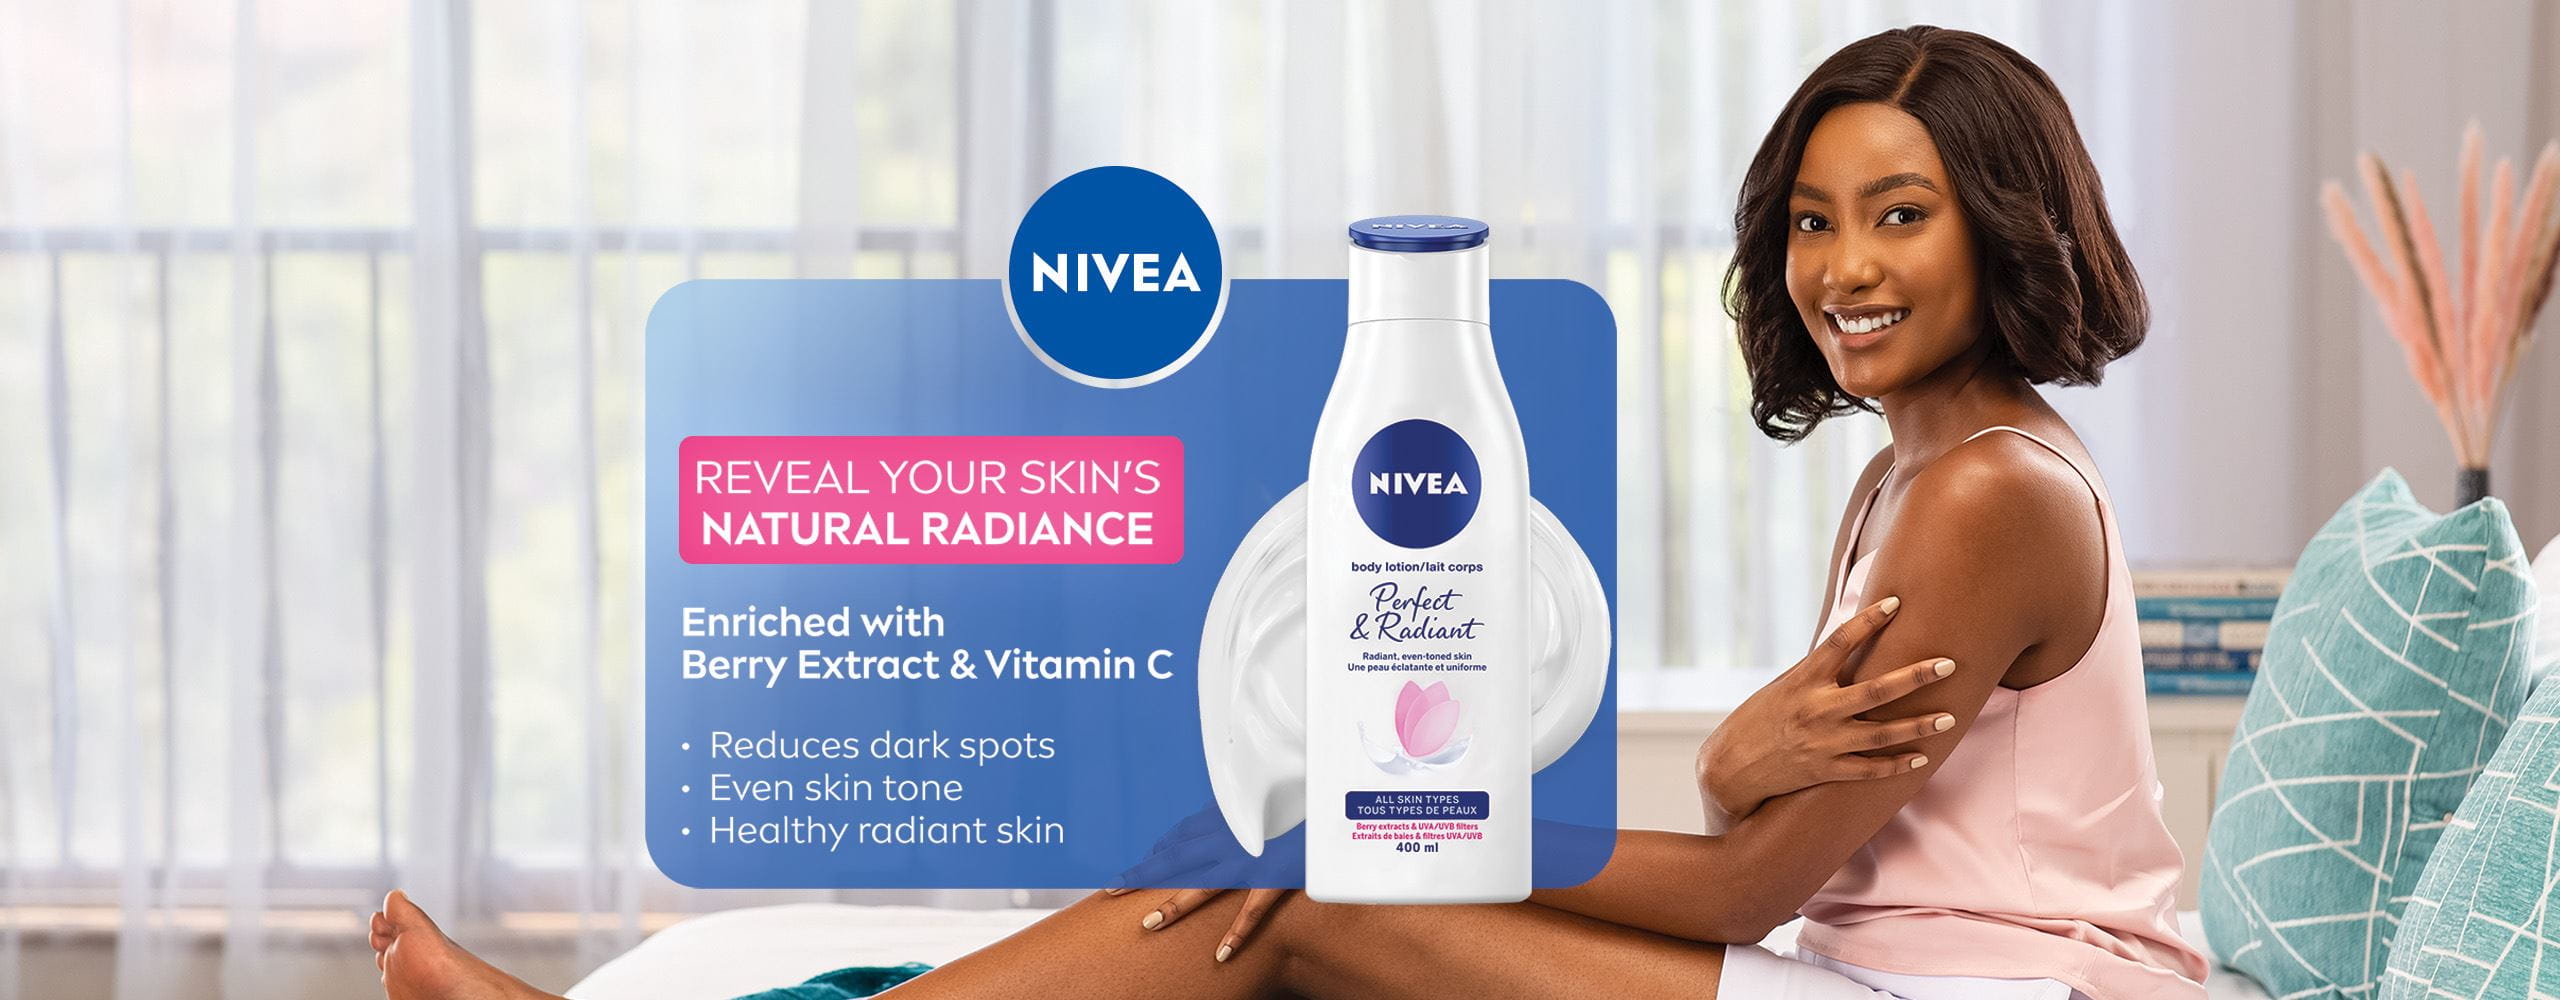 Reveal your skin’s natural radiance with NIVEA Perfect & Radiant